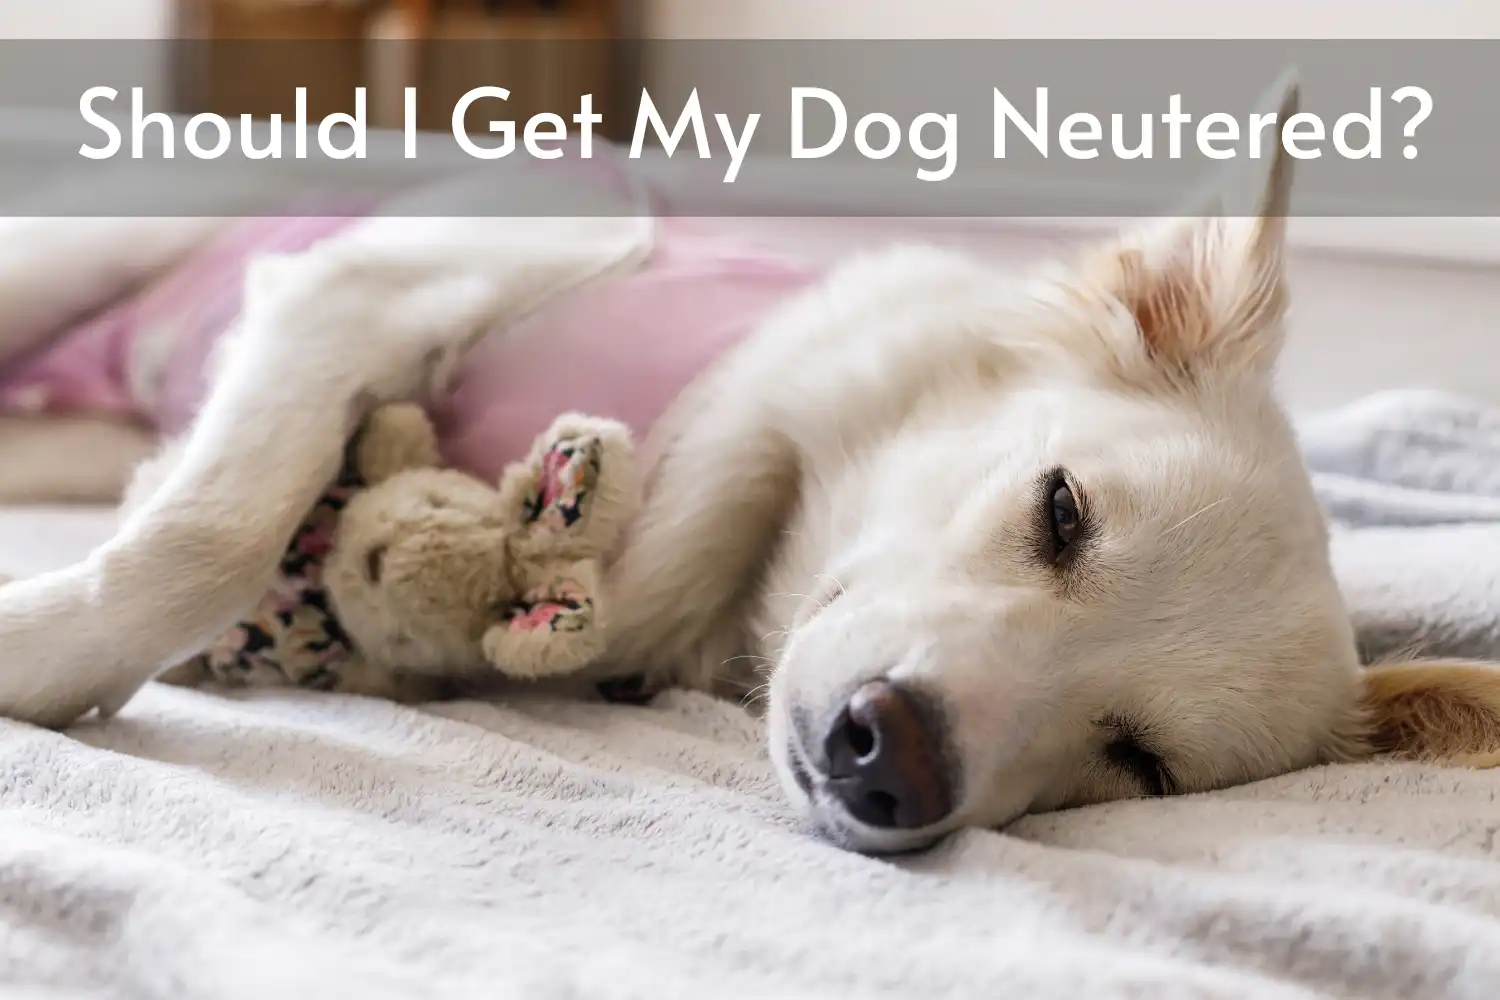 How Long Does Dog Wear Cone after Neuter? - Should I Get My Dog Neutered?